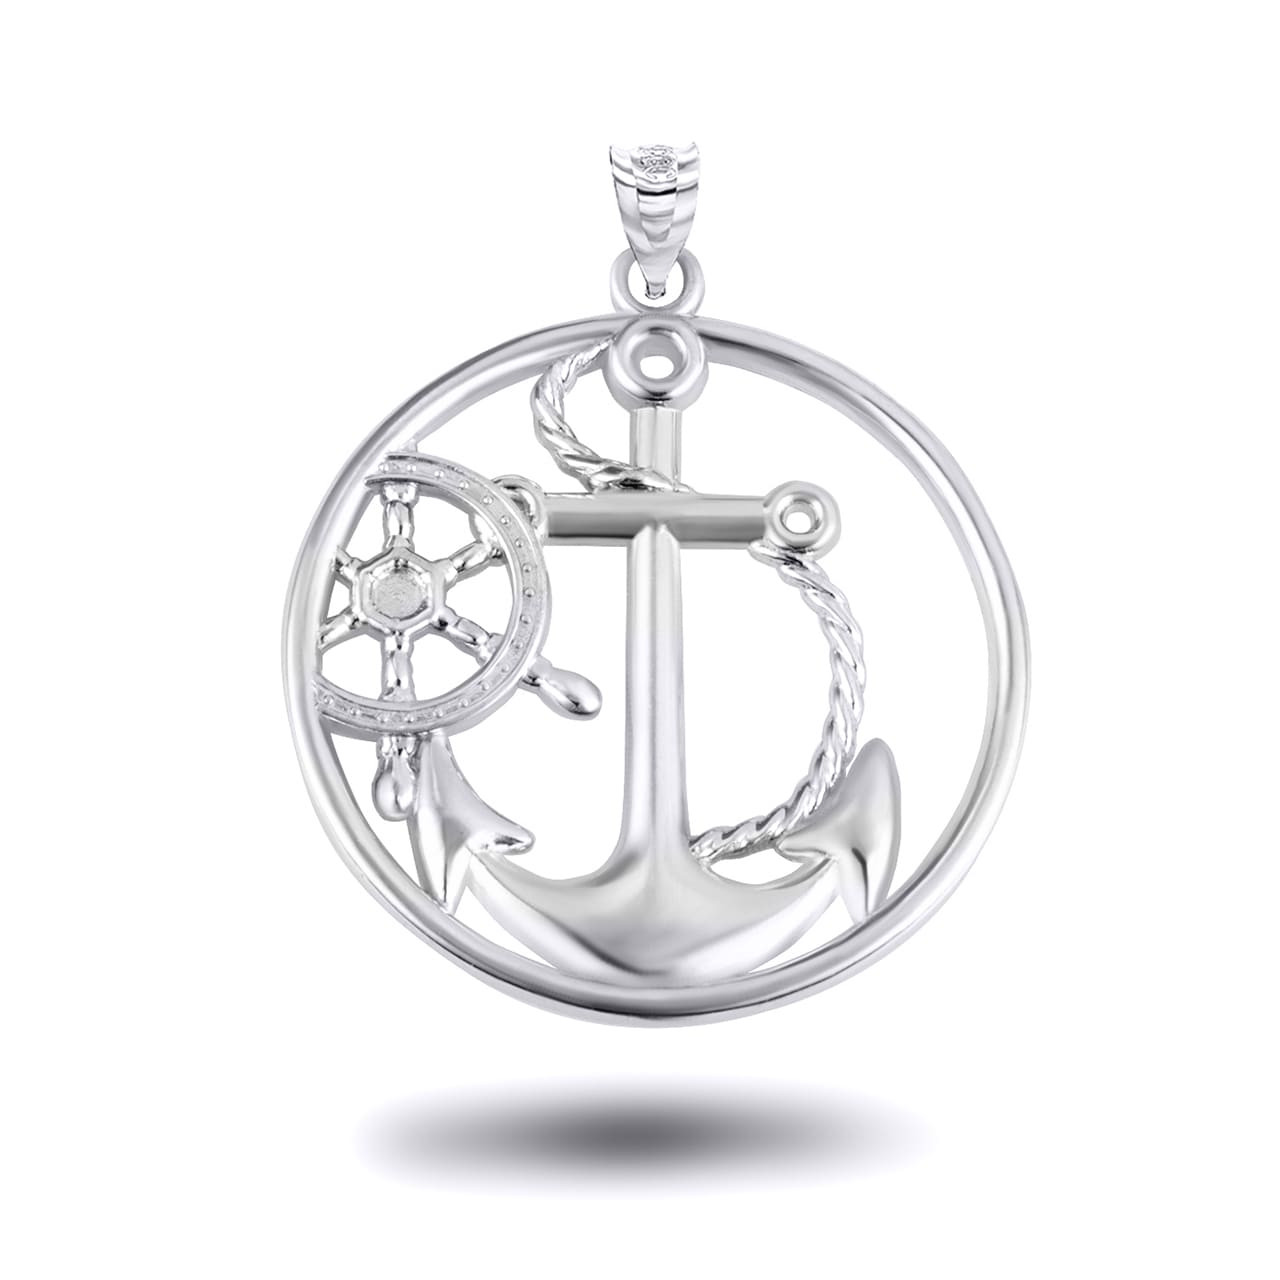 https://cdn11.bigcommerce.com/s-f813d/images/stencil/1280x1280/products/33151/196511/White_Gold_Anchor_Pendant__13228.1680911844.jpg?c=2